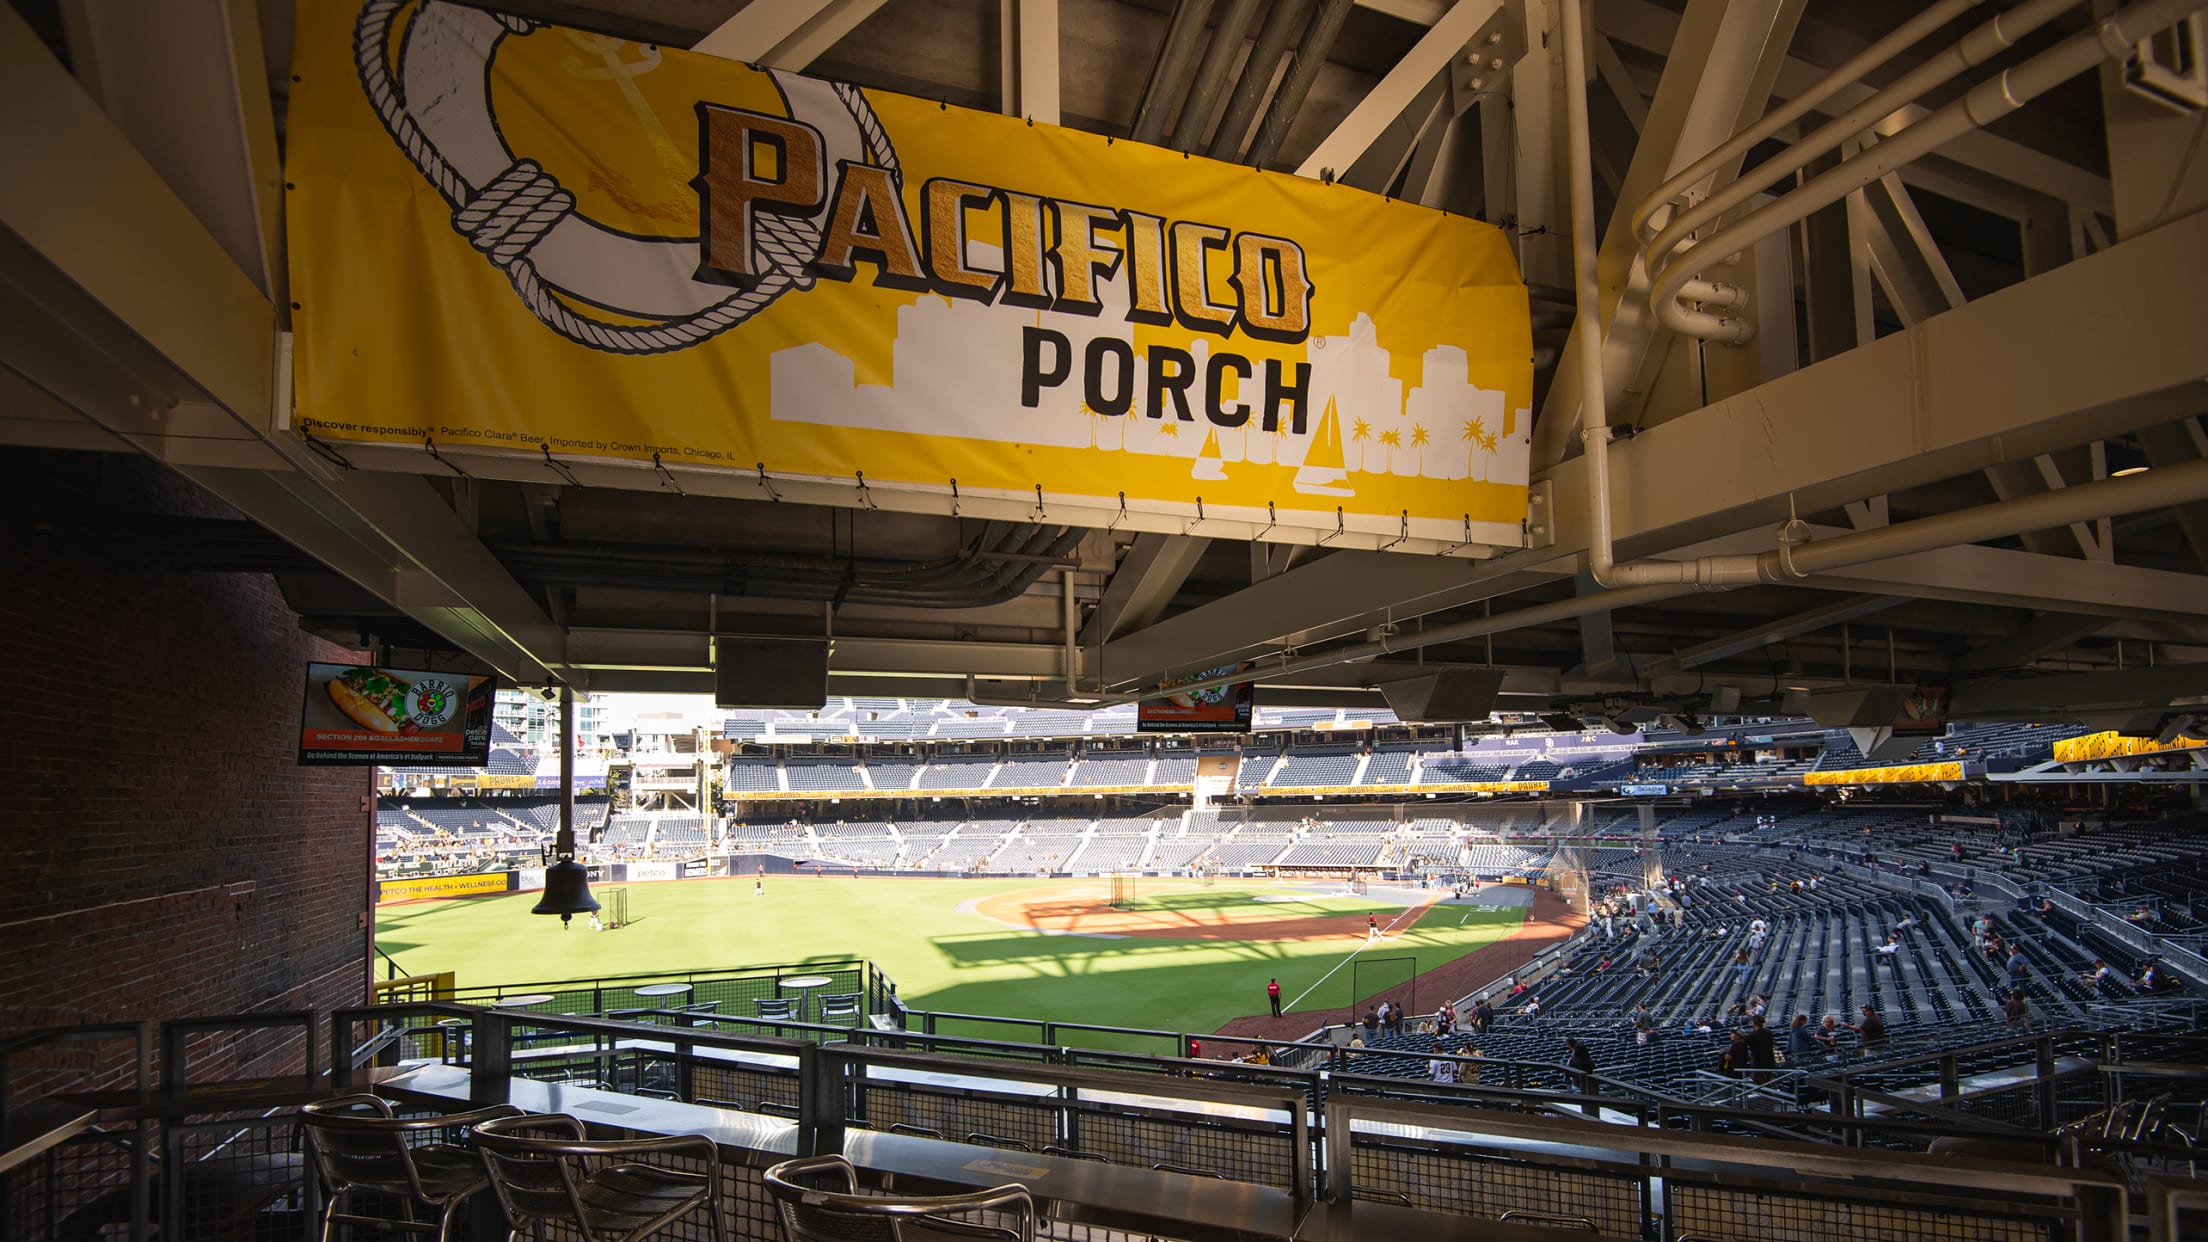 Holiday Bowl at Petco Park: What to know before you go